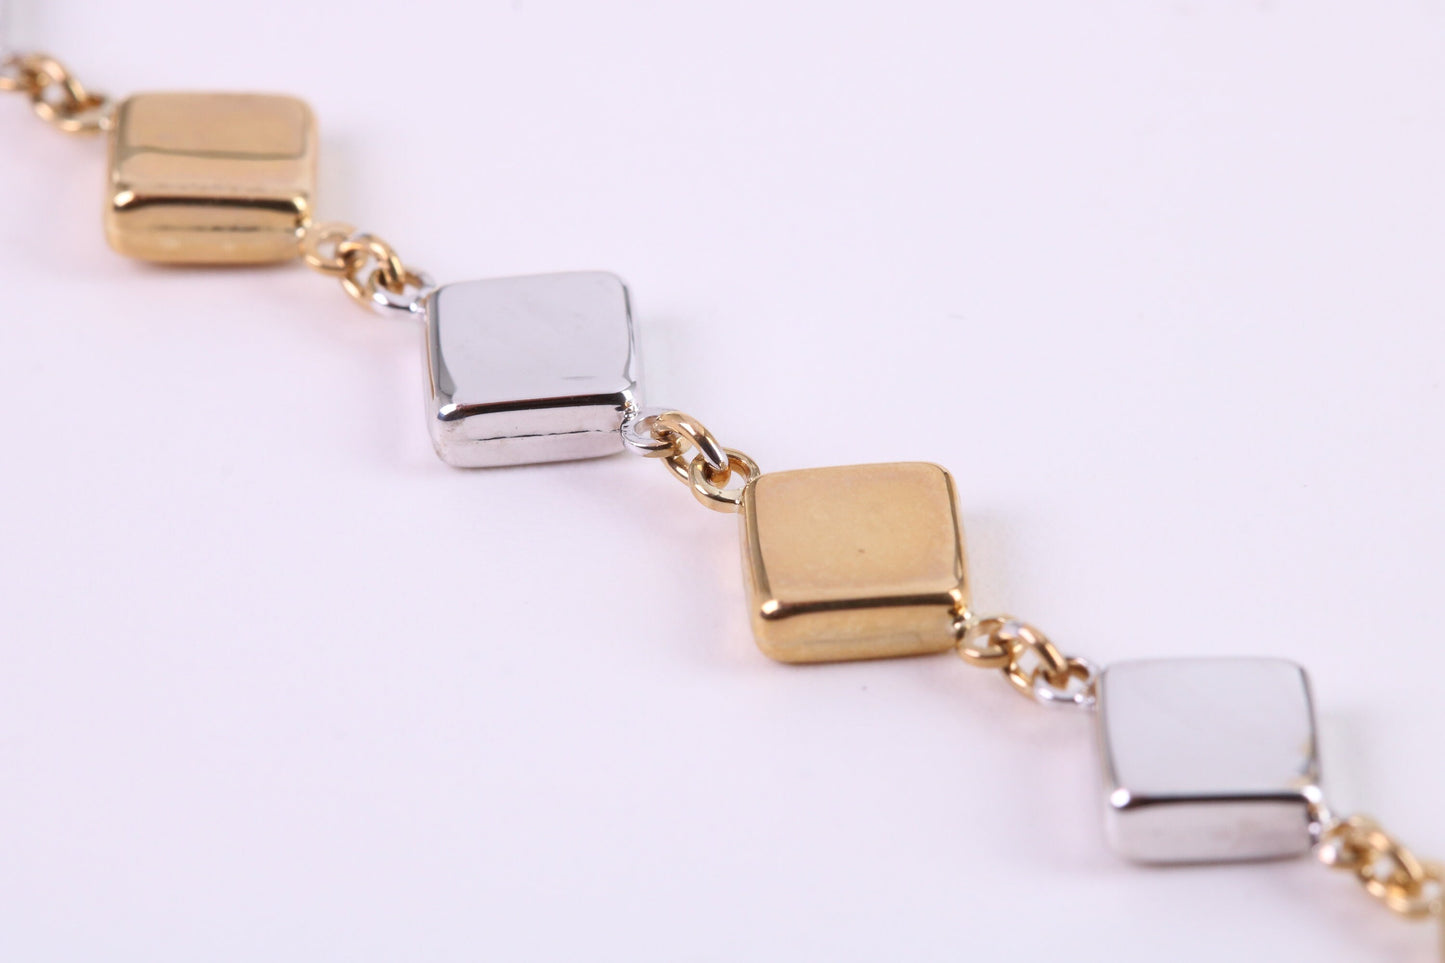 Square Link Bracelet, Made From Solid Yellow and White Gold, British Hallmarked, Luxury Gift Boxed